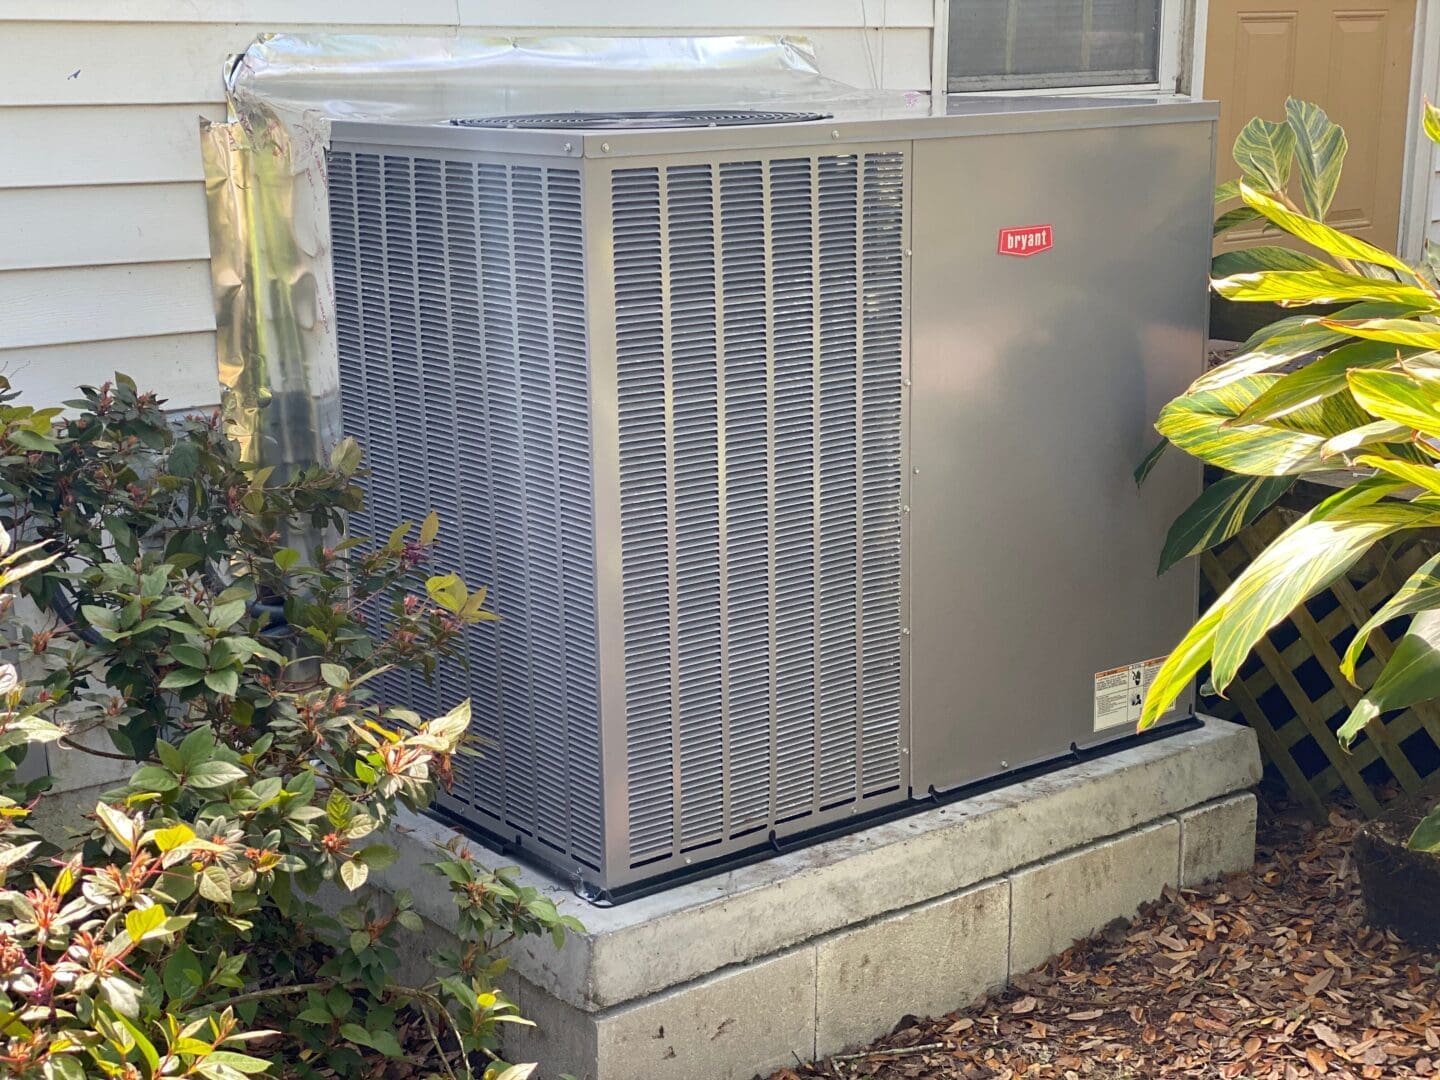 An outdoor hvac unit from bryant, installed on a concrete slab next to a house, surrounded by bushes and shaded by trees.